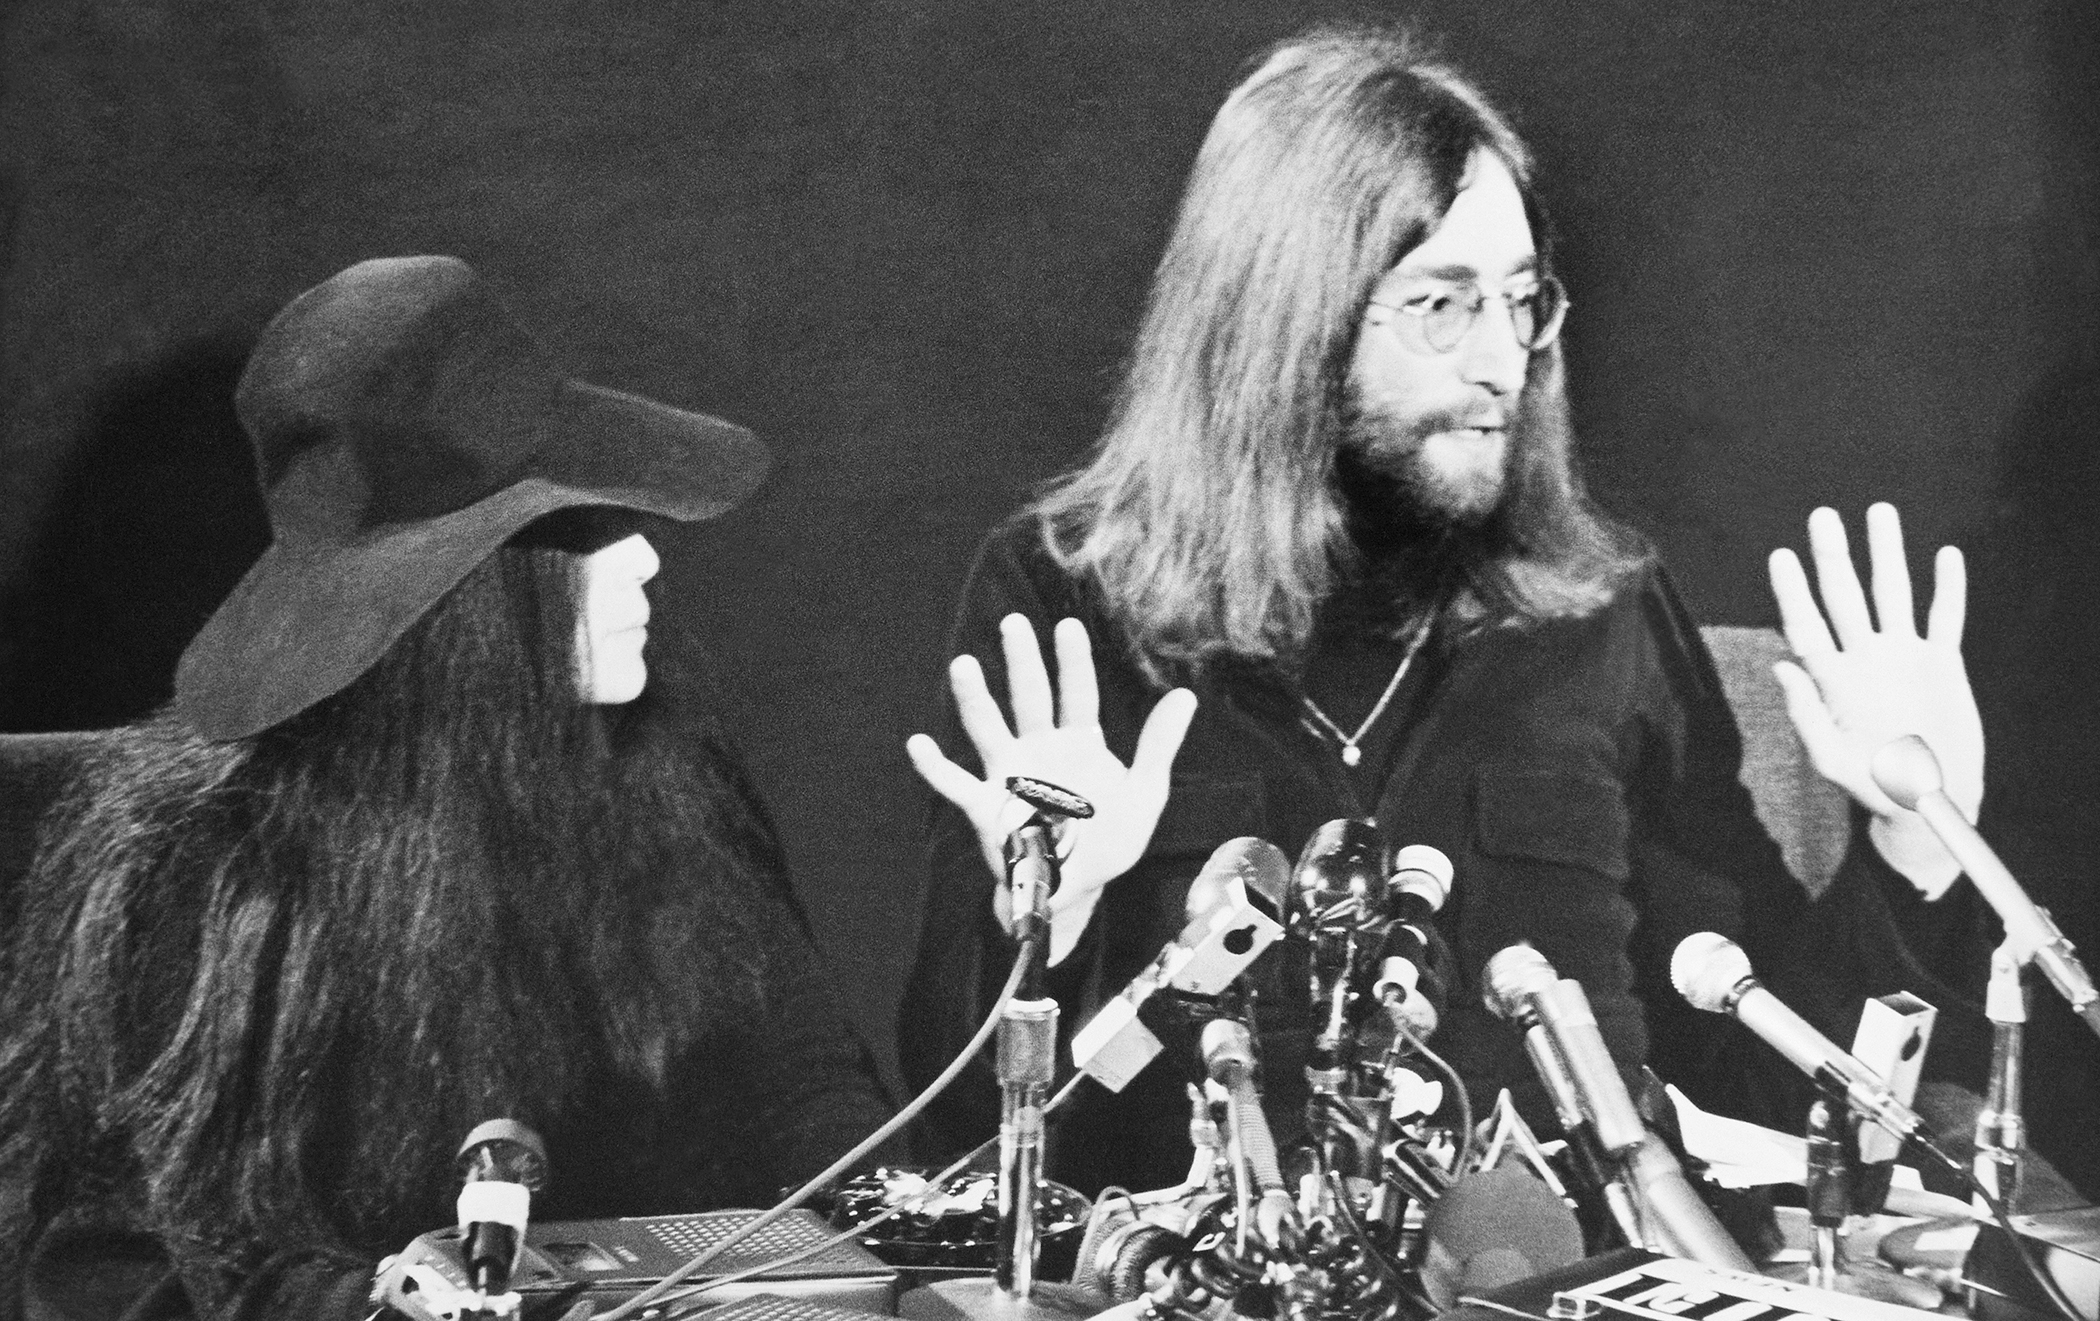 Portrait Of John Lennon And Yoko Ono During A Press Conference For Peace Persuasion At Toronto In Canada On December 1969.